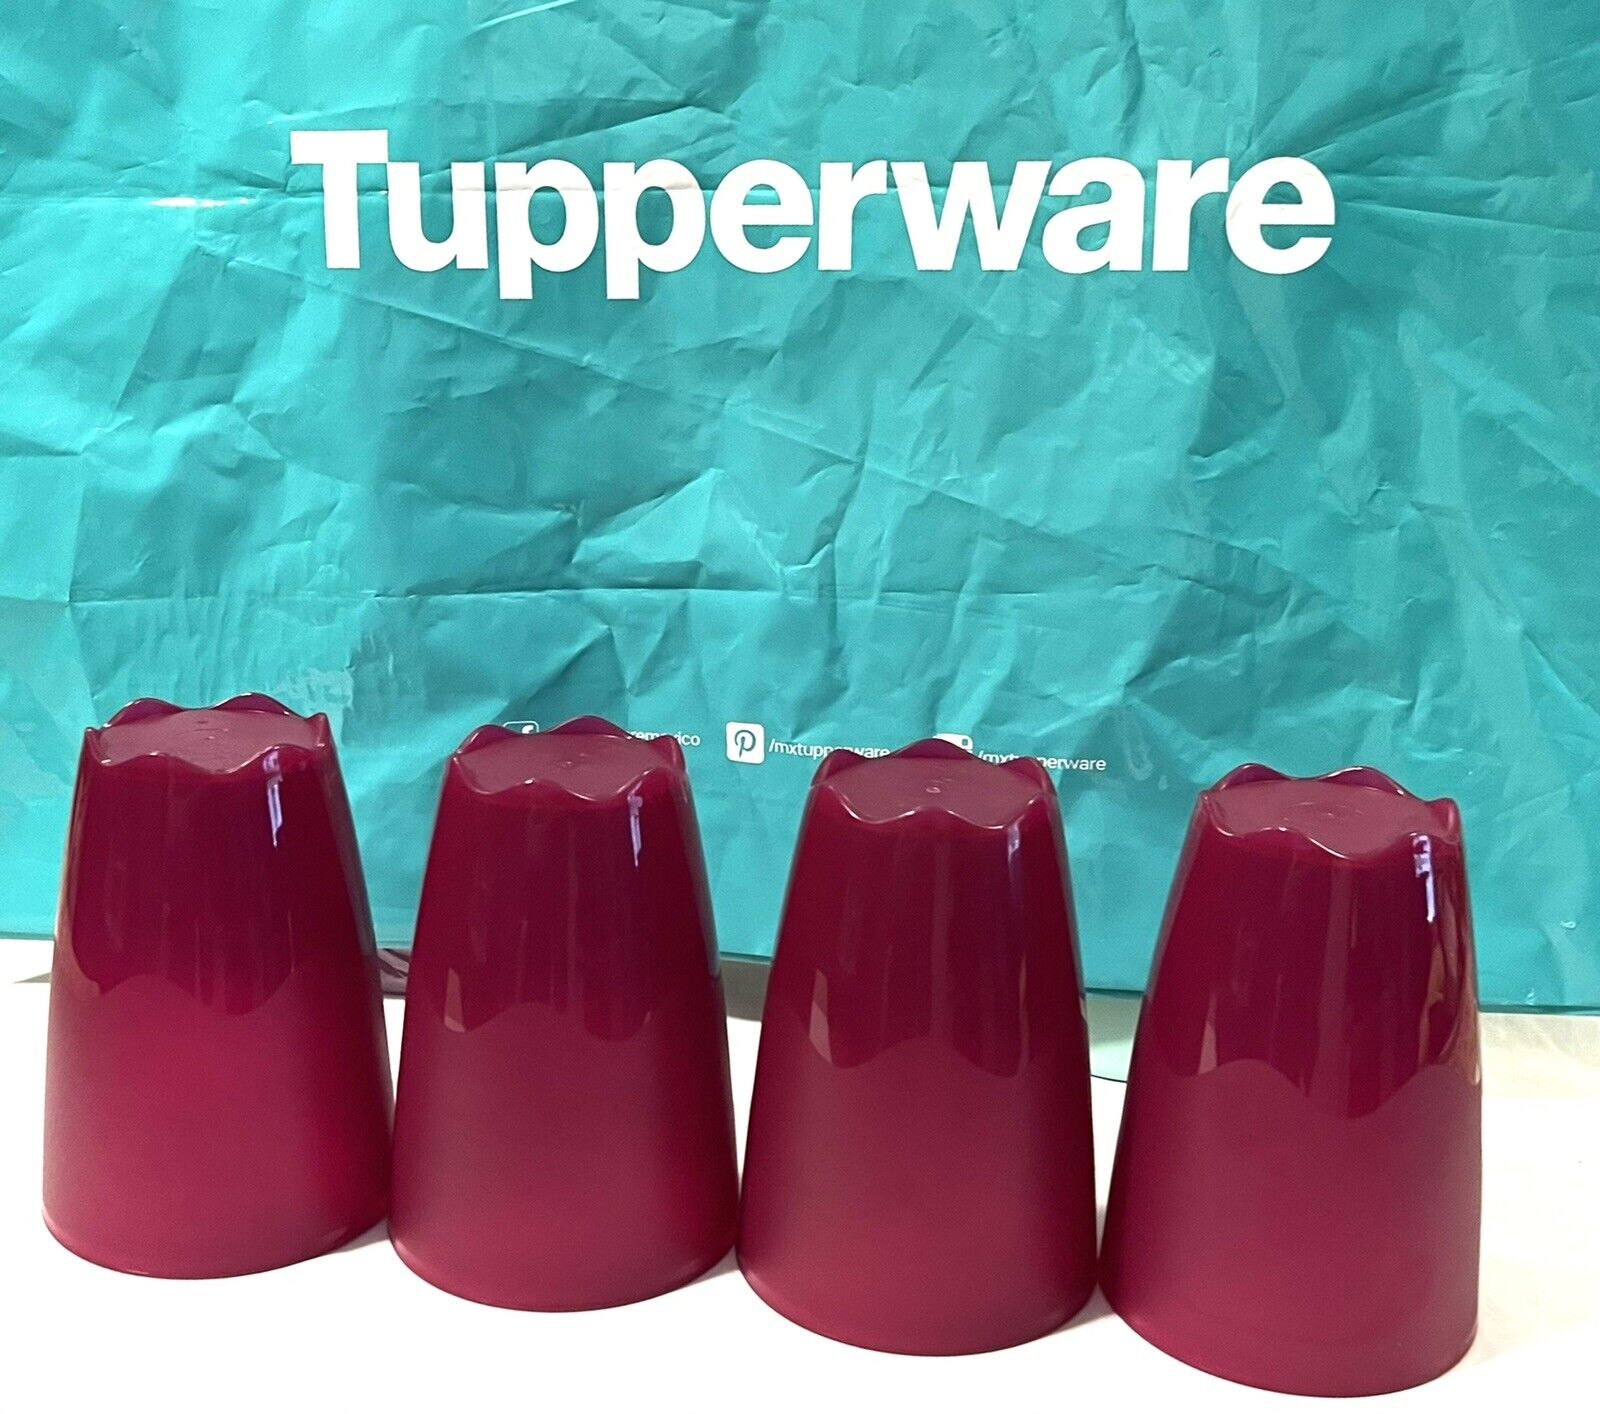 Set of 4 Tupperware Open House Tumblers in Wine Color 16 Fl Oz